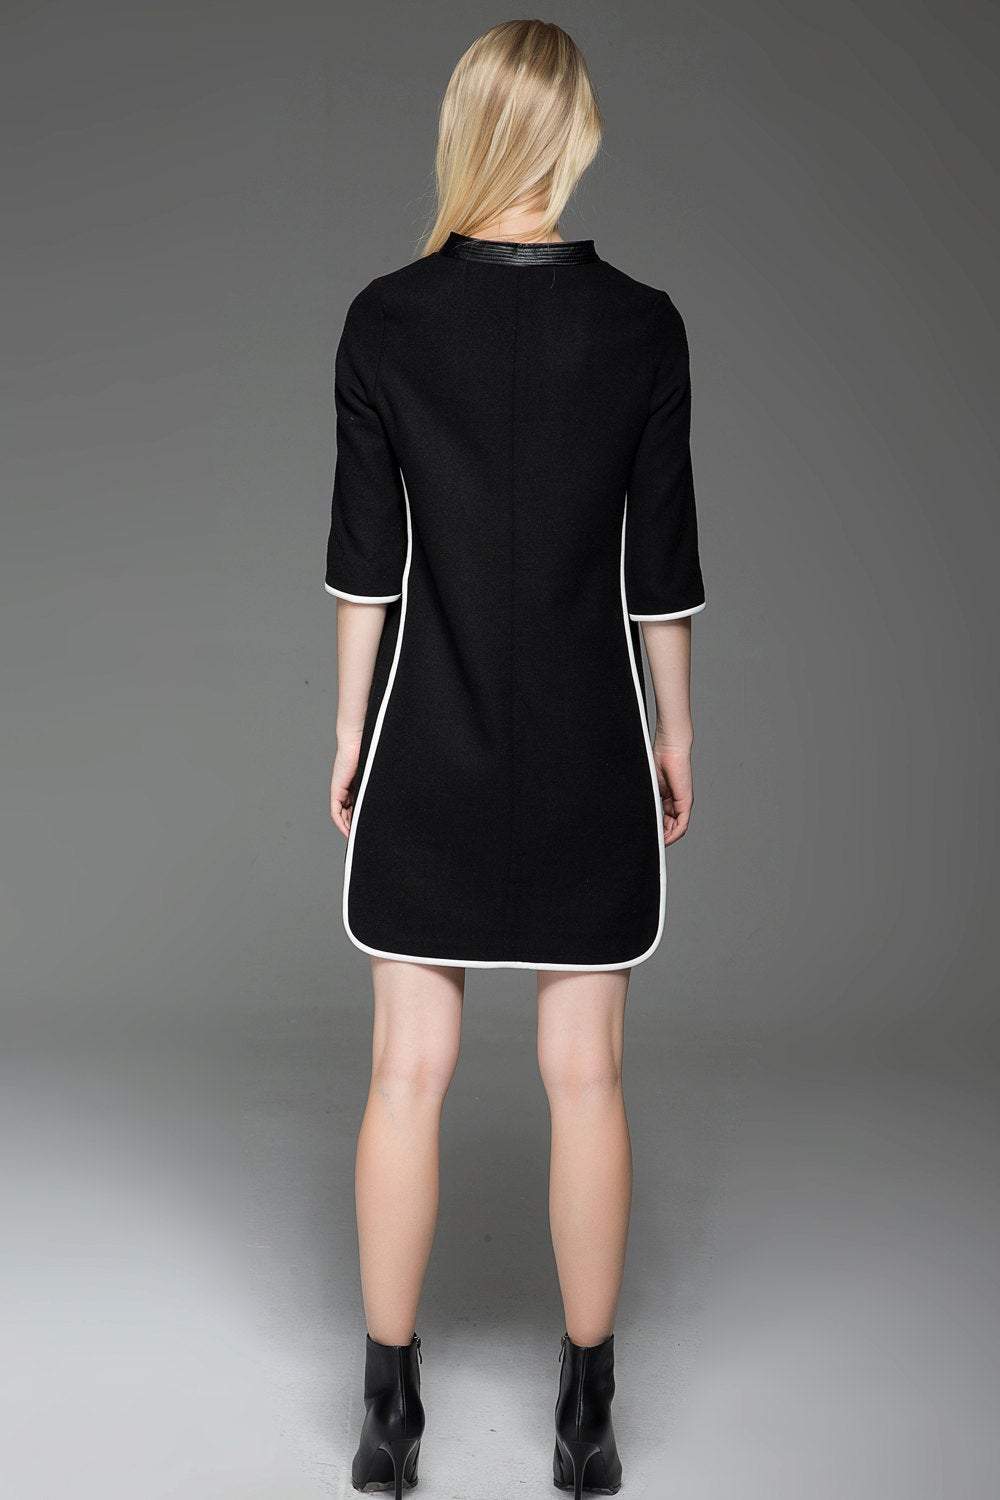 Chanel Style Dress - Black Wool Mini Dress with Cream Piping and